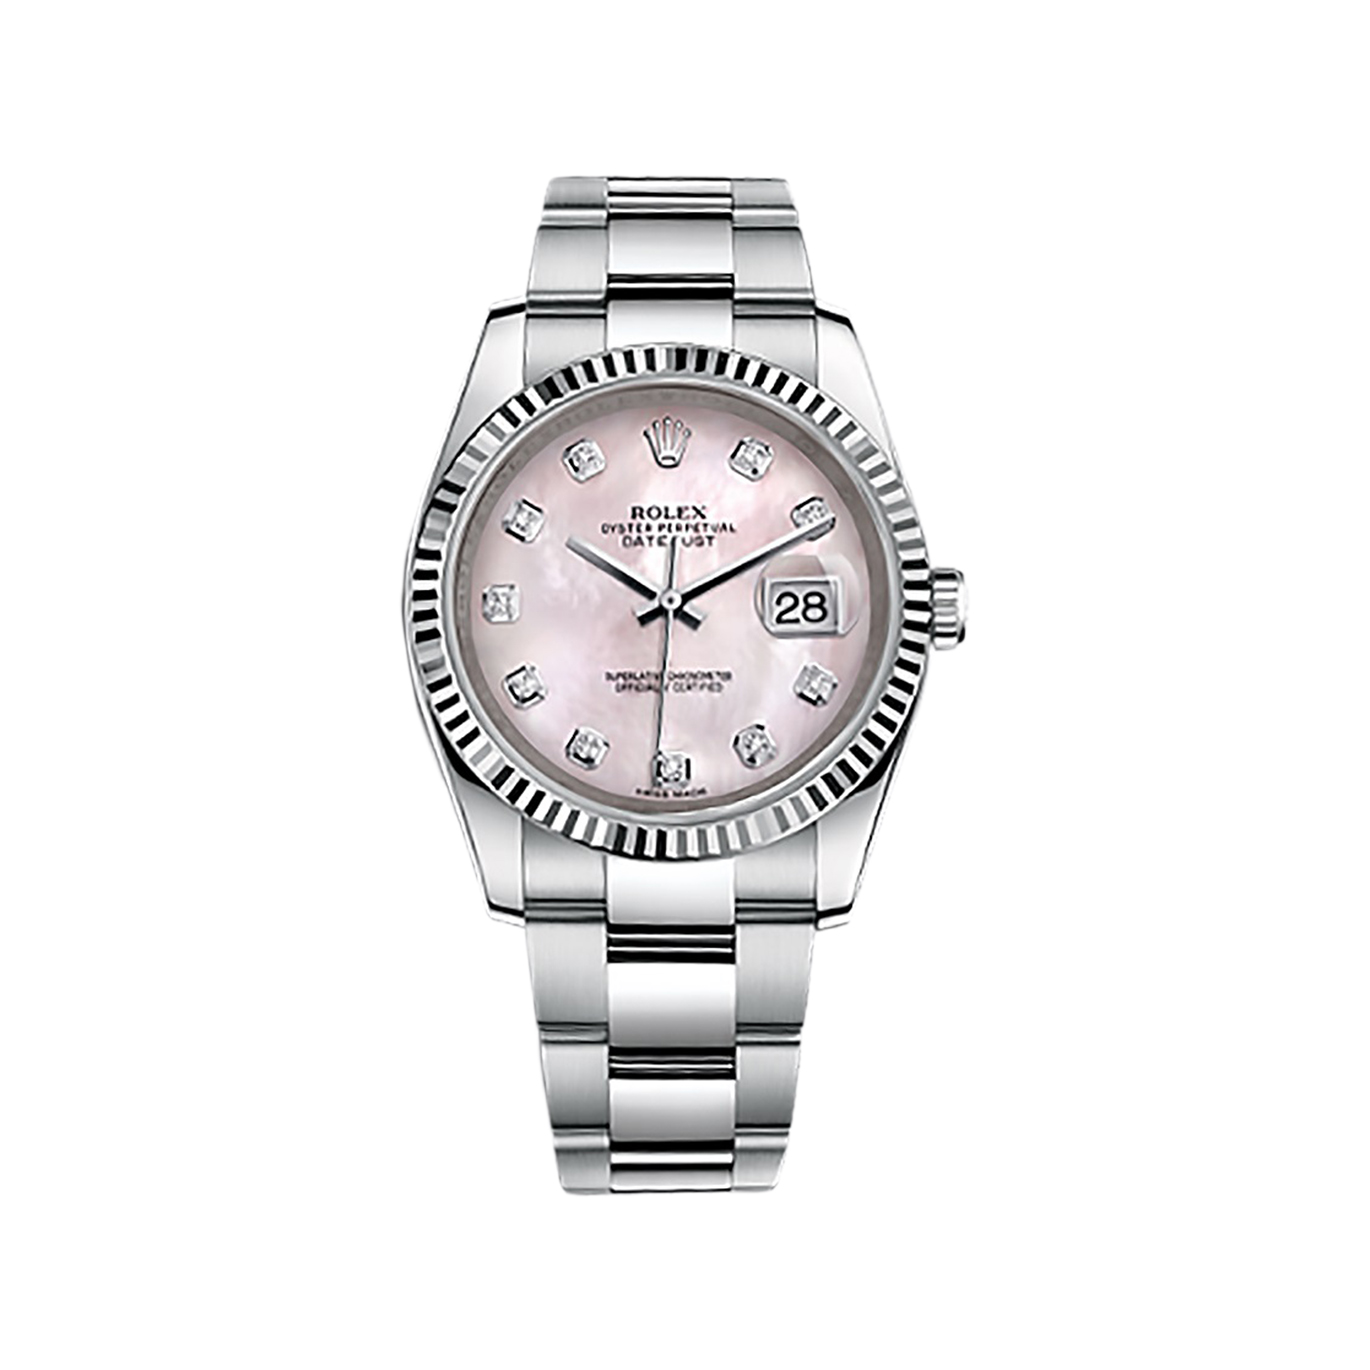 Datejust 36 116234 White Gold & Stainless Steel Watch (Pink Mother-of-Pearl Set with Diamonds) - Click Image to Close